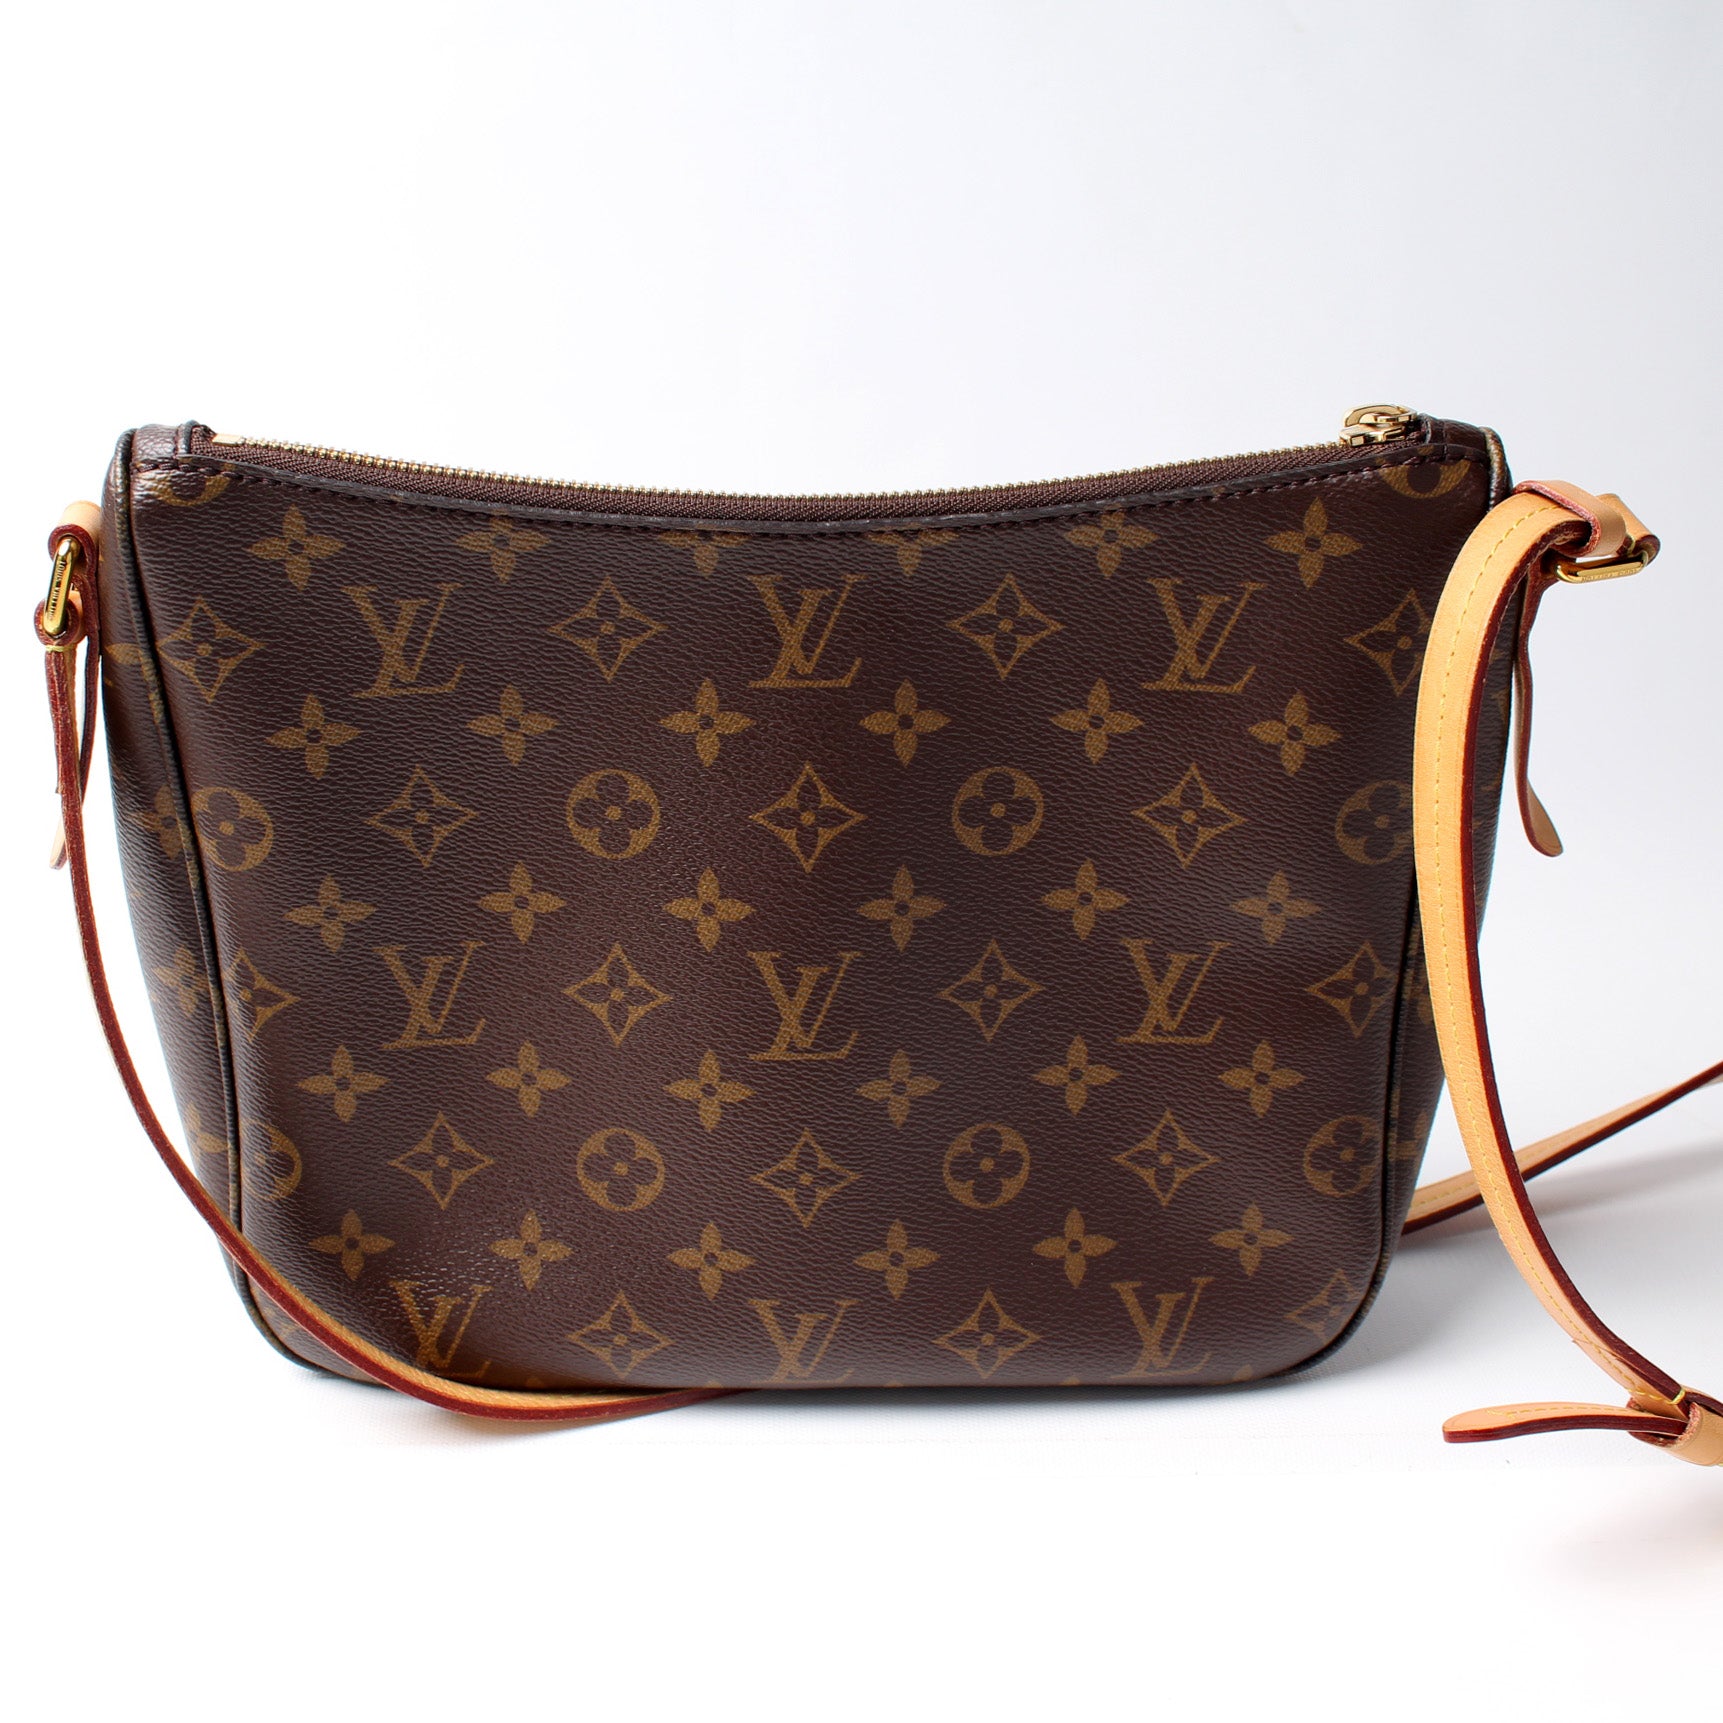 Looking to sell my LV Mabillon Crossbody : r/Louisvuitton